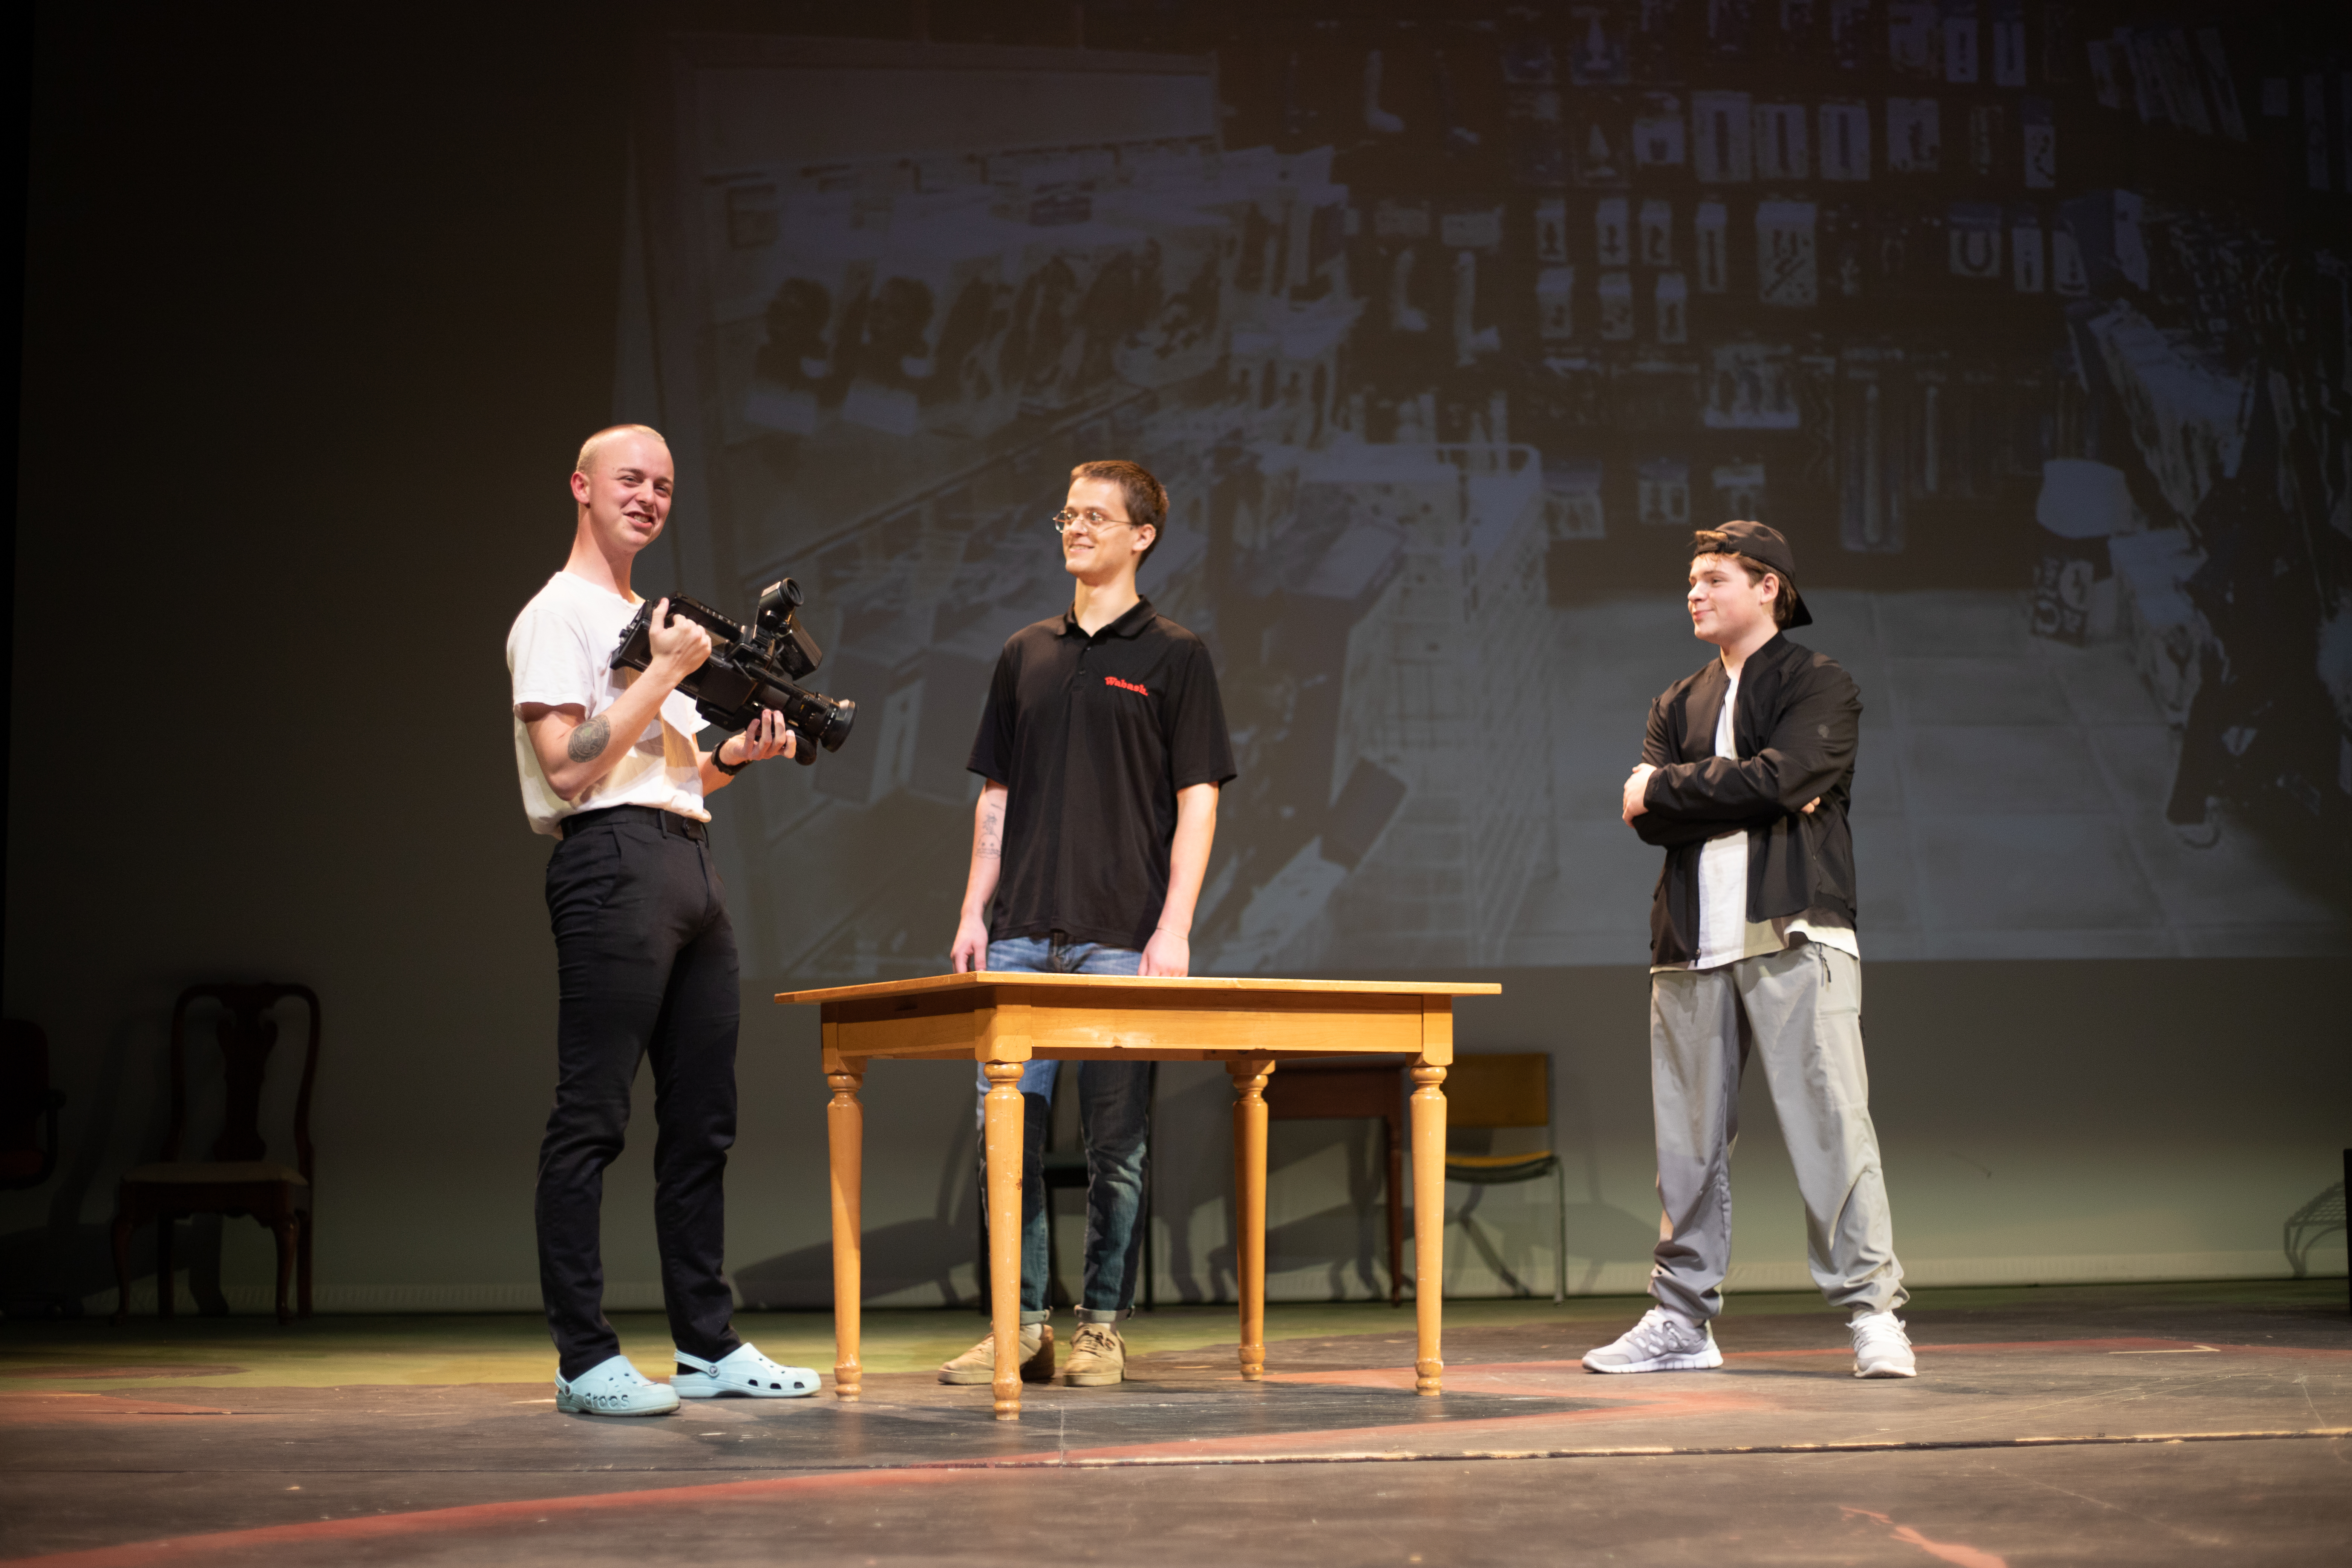 Johannes (far left) said organizing “Saturday Night Live,” a one-night-only production written, directed, and acted entirely by students, was one of his proudest accomplishments at Wabash.